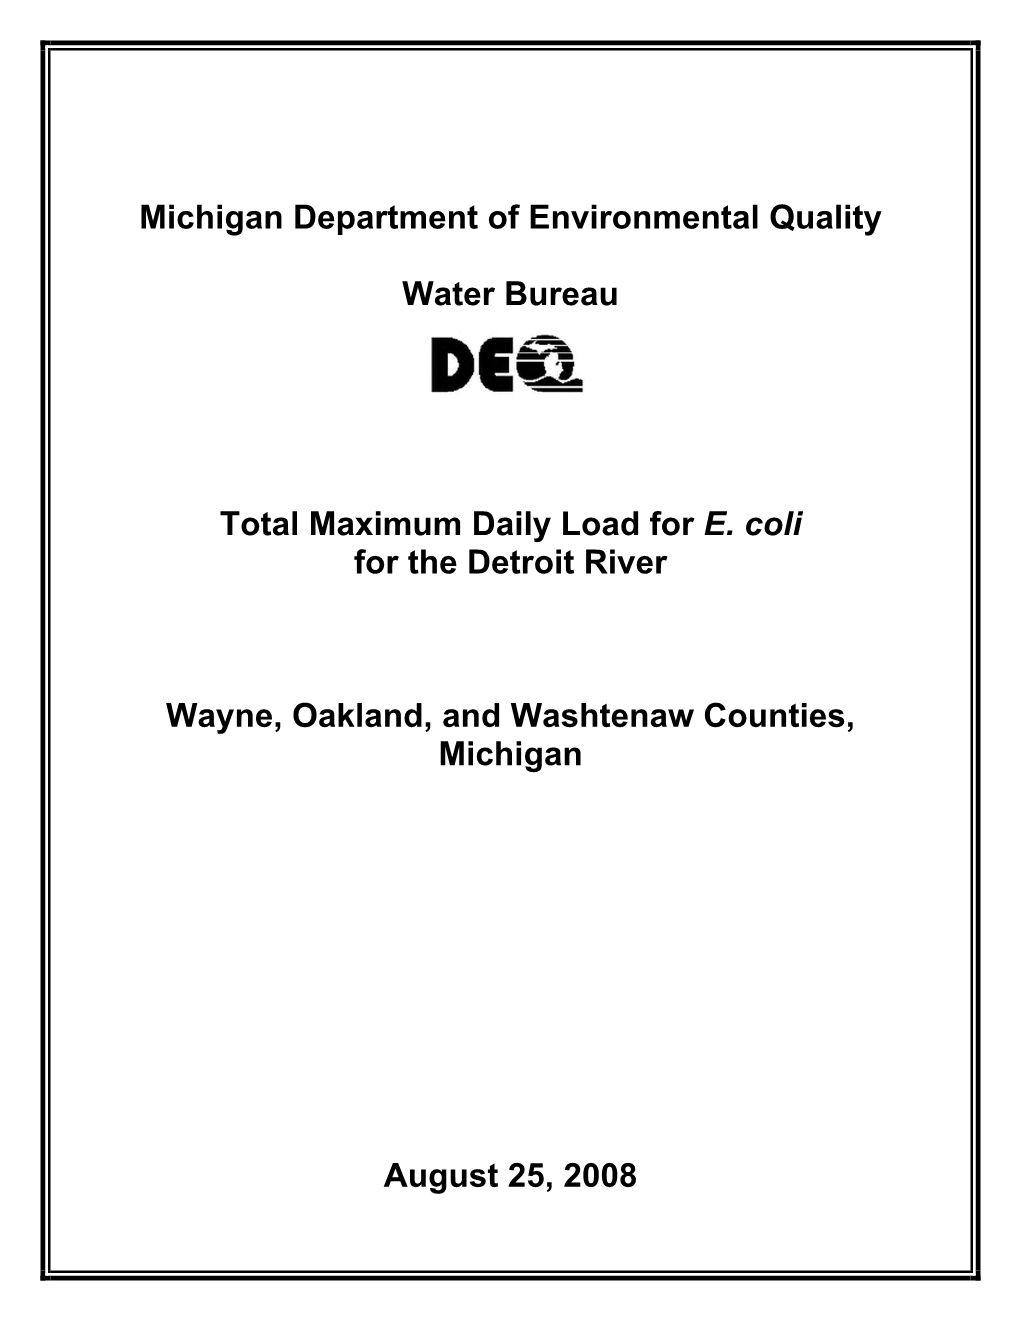 Total Maximum Daily Load for E. Coli for the Detroit River